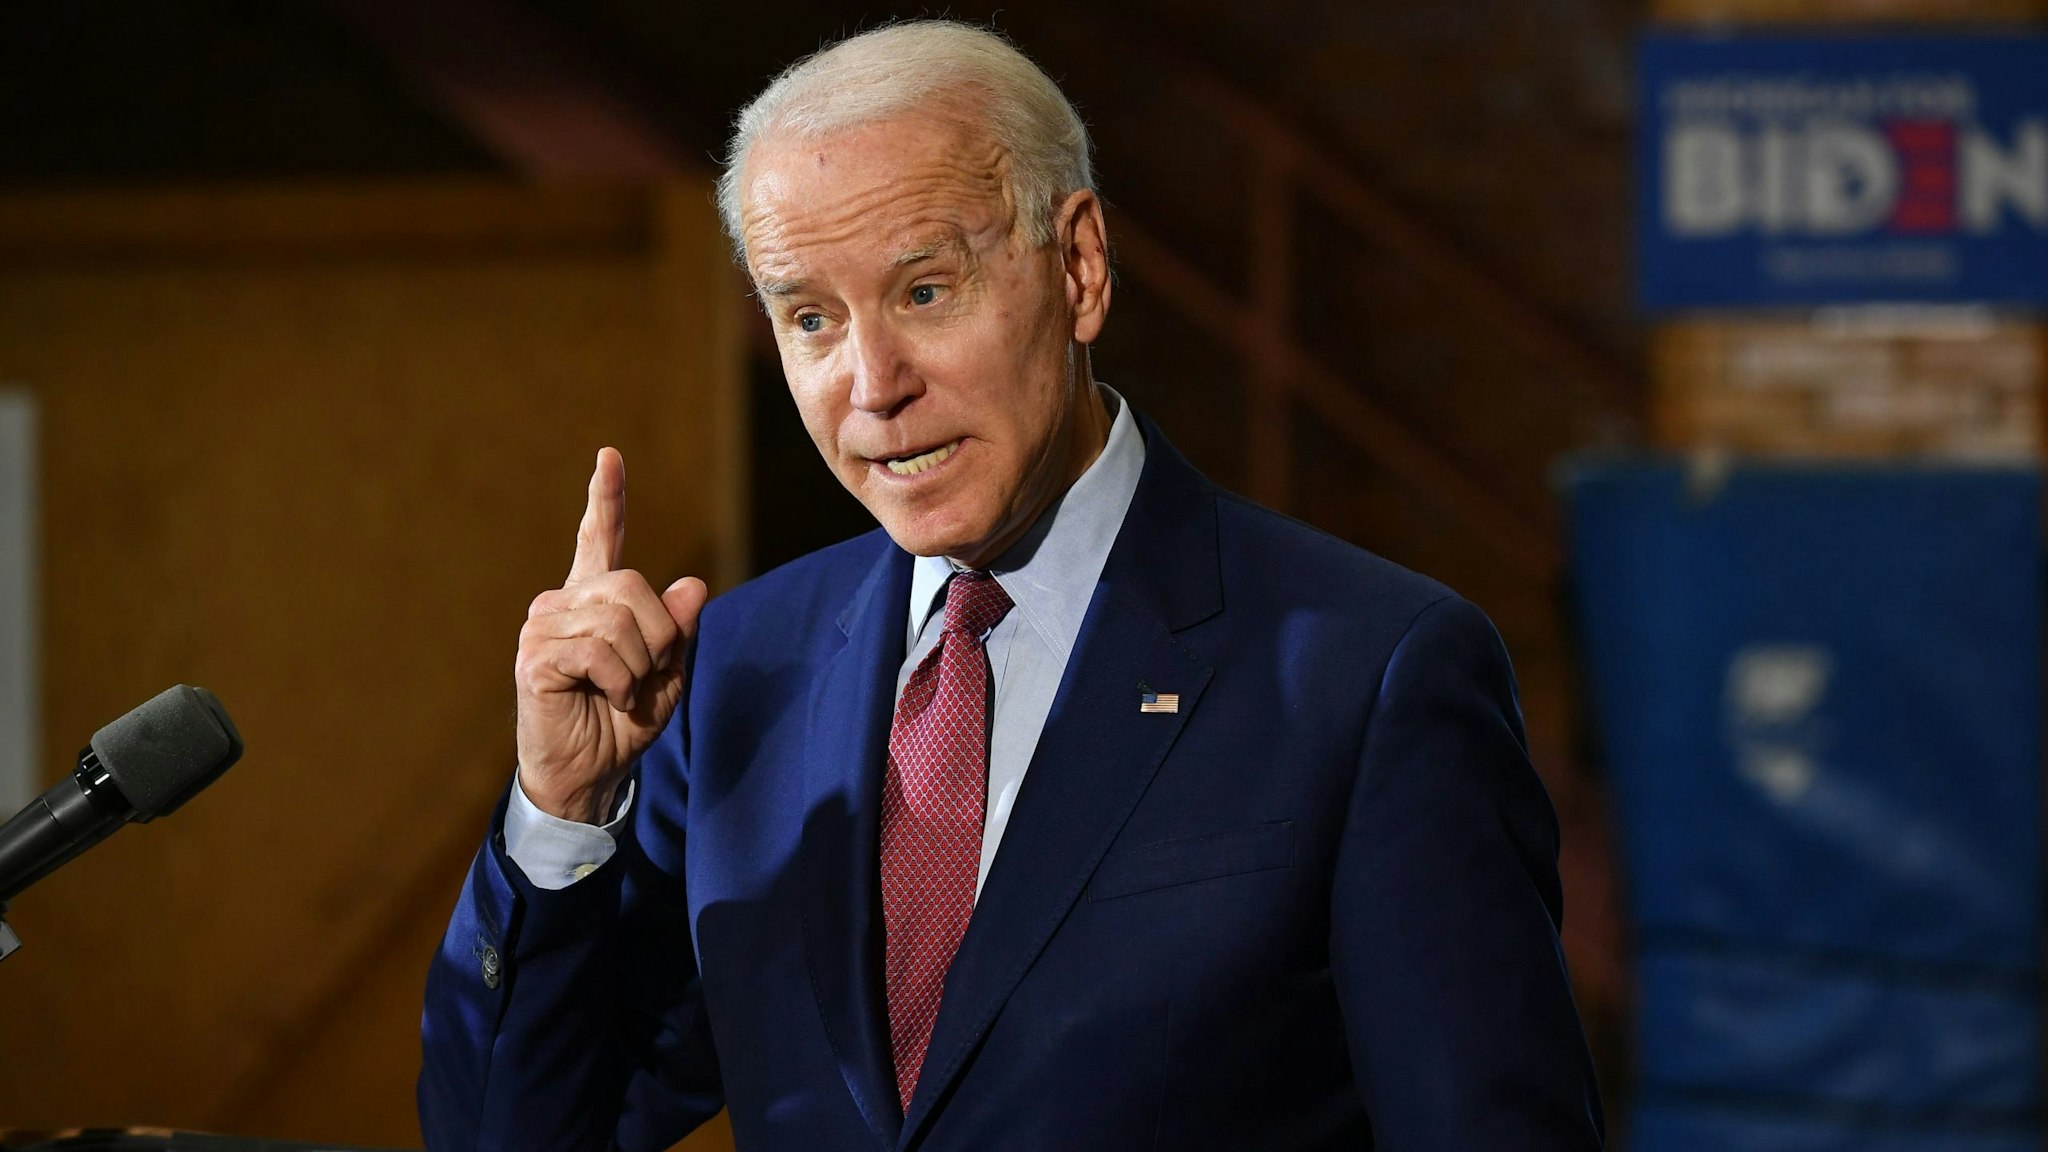 Democratic presidential candidate Joe Biden speaks to supporters during a campaign stop at Berston Field House in Flint, Michigan on March 9, 2020. (Photo by MANDEL NGAN / AFP) (Photo by MANDEL NGAN/AFP via Getty Images)